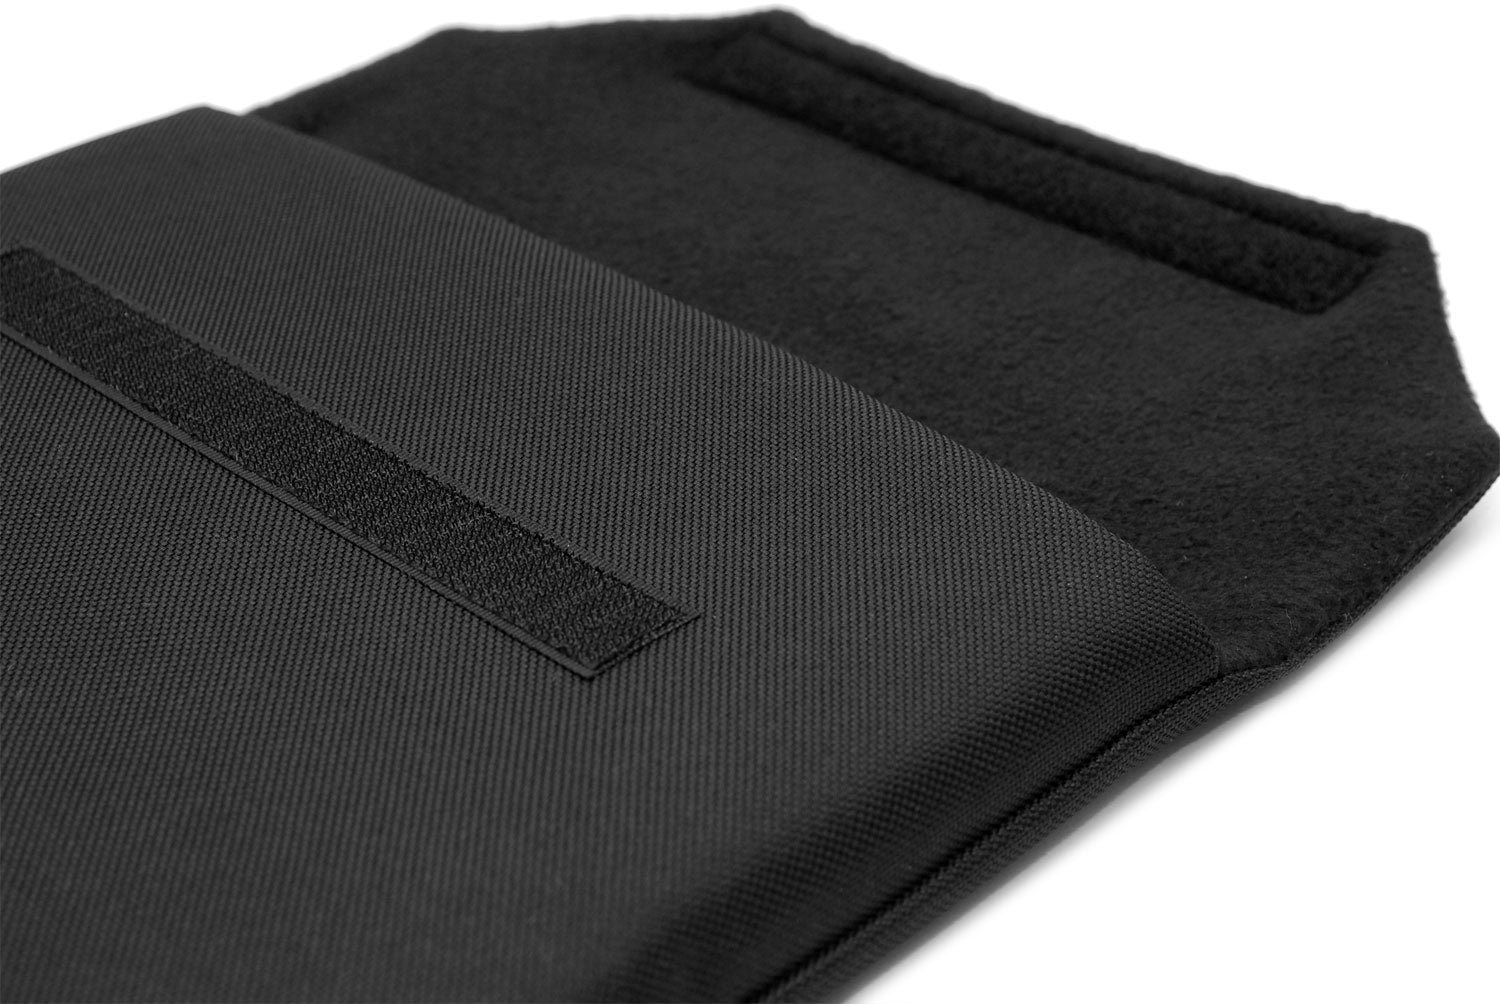 Microsoft Surface Laptop 13.5-inch Sleeve Case - Everyday Canvas